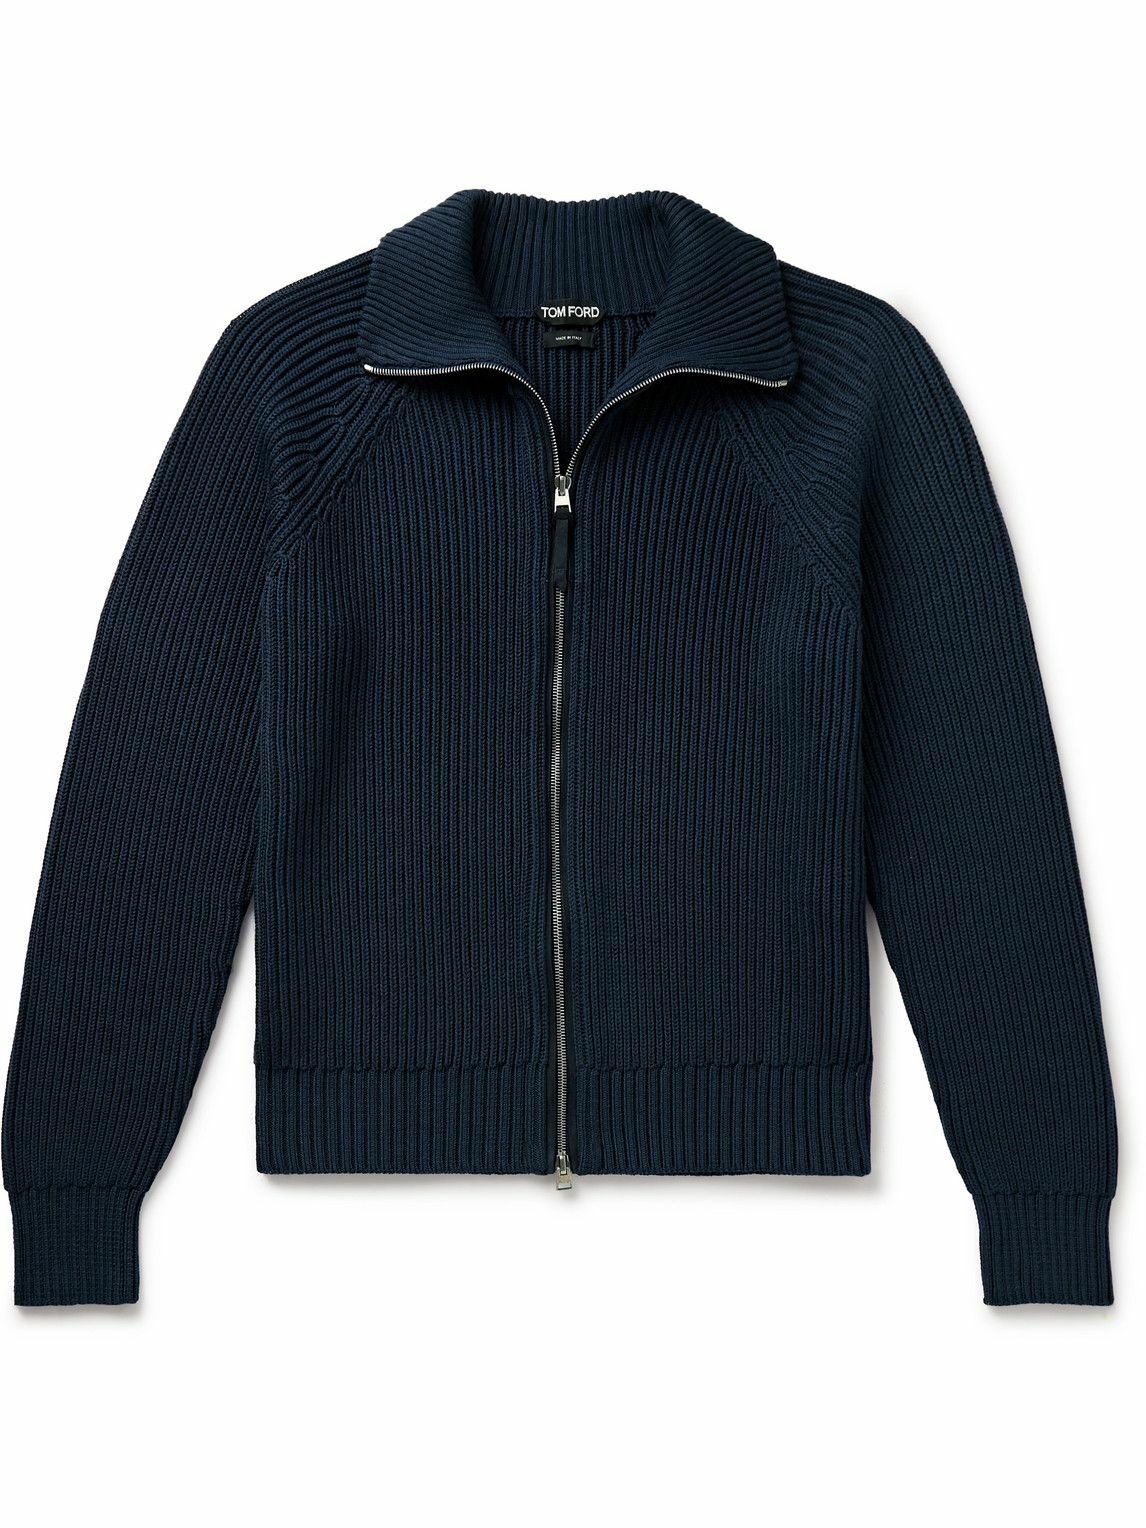 Photo: TOM FORD - Slim-Fit Ribbed Silk and Cotton-Blend Zip-Up Cardigan - Blue